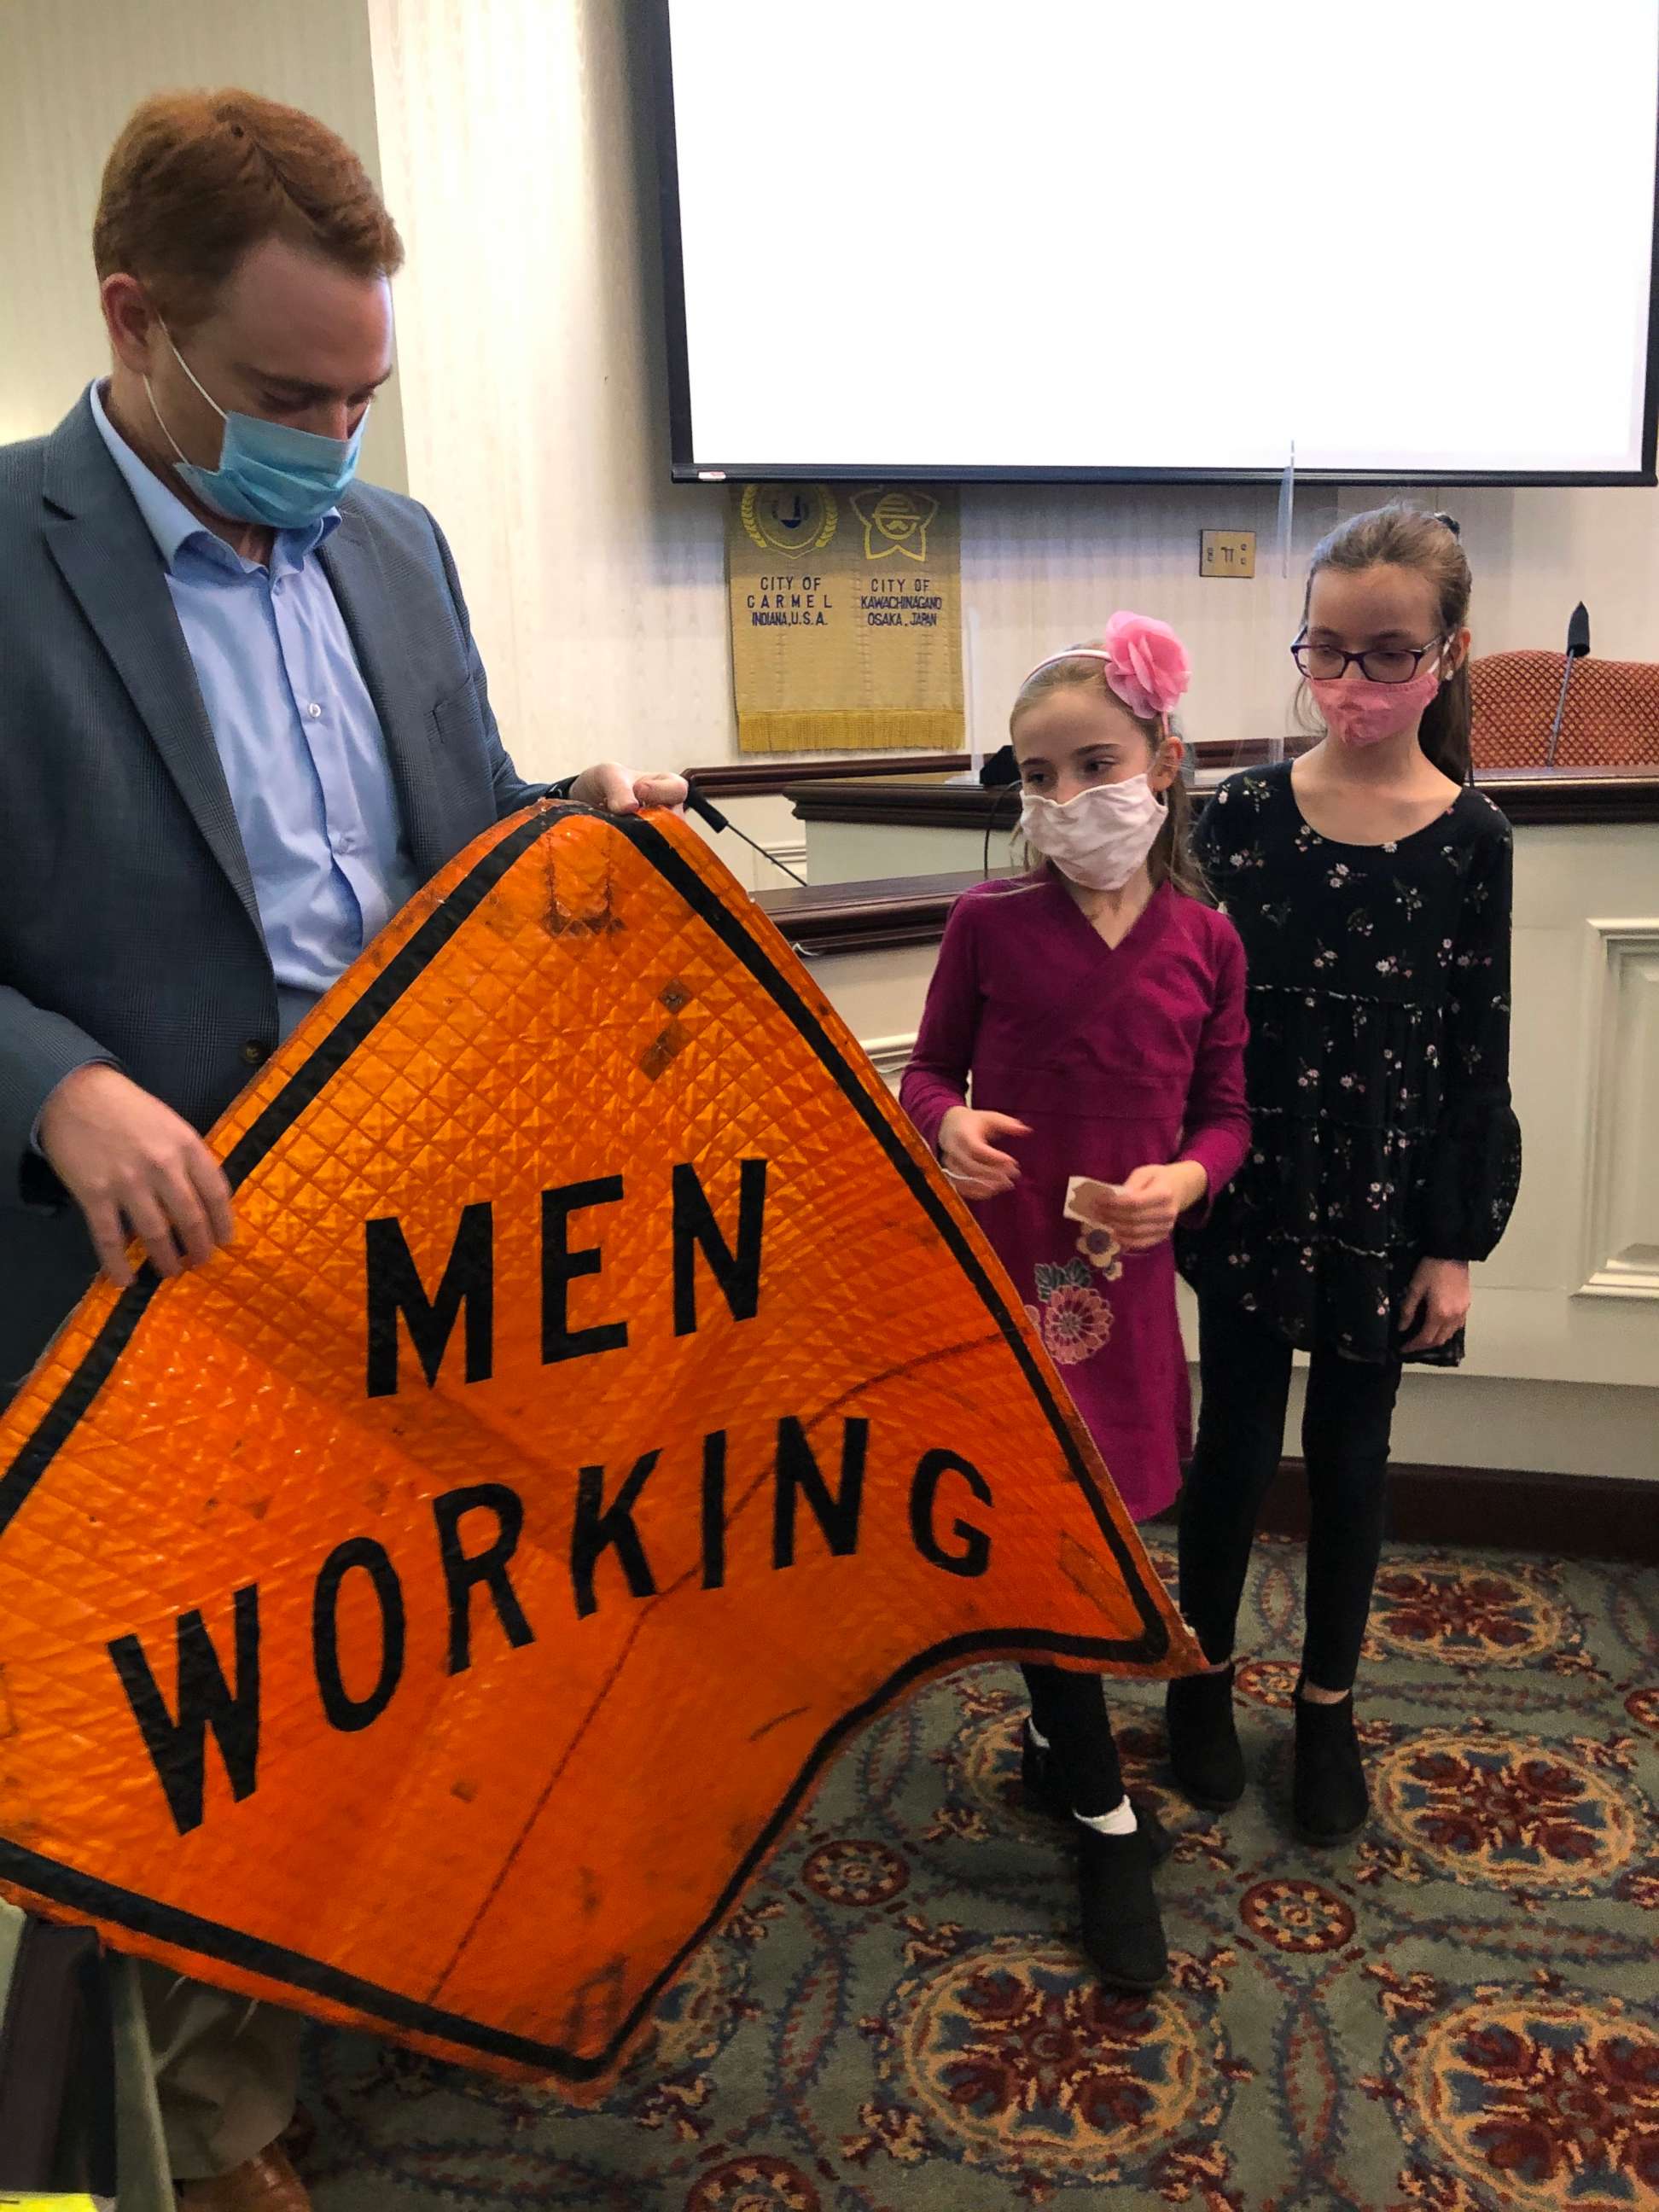 PHOTO: On March 1, the first day of Women's History Month, Blair and Brienne attended a City Hall council meeting in Carmel, Indiana, where they read their letters and received a "Men Working" sign that officials dug up from storage.